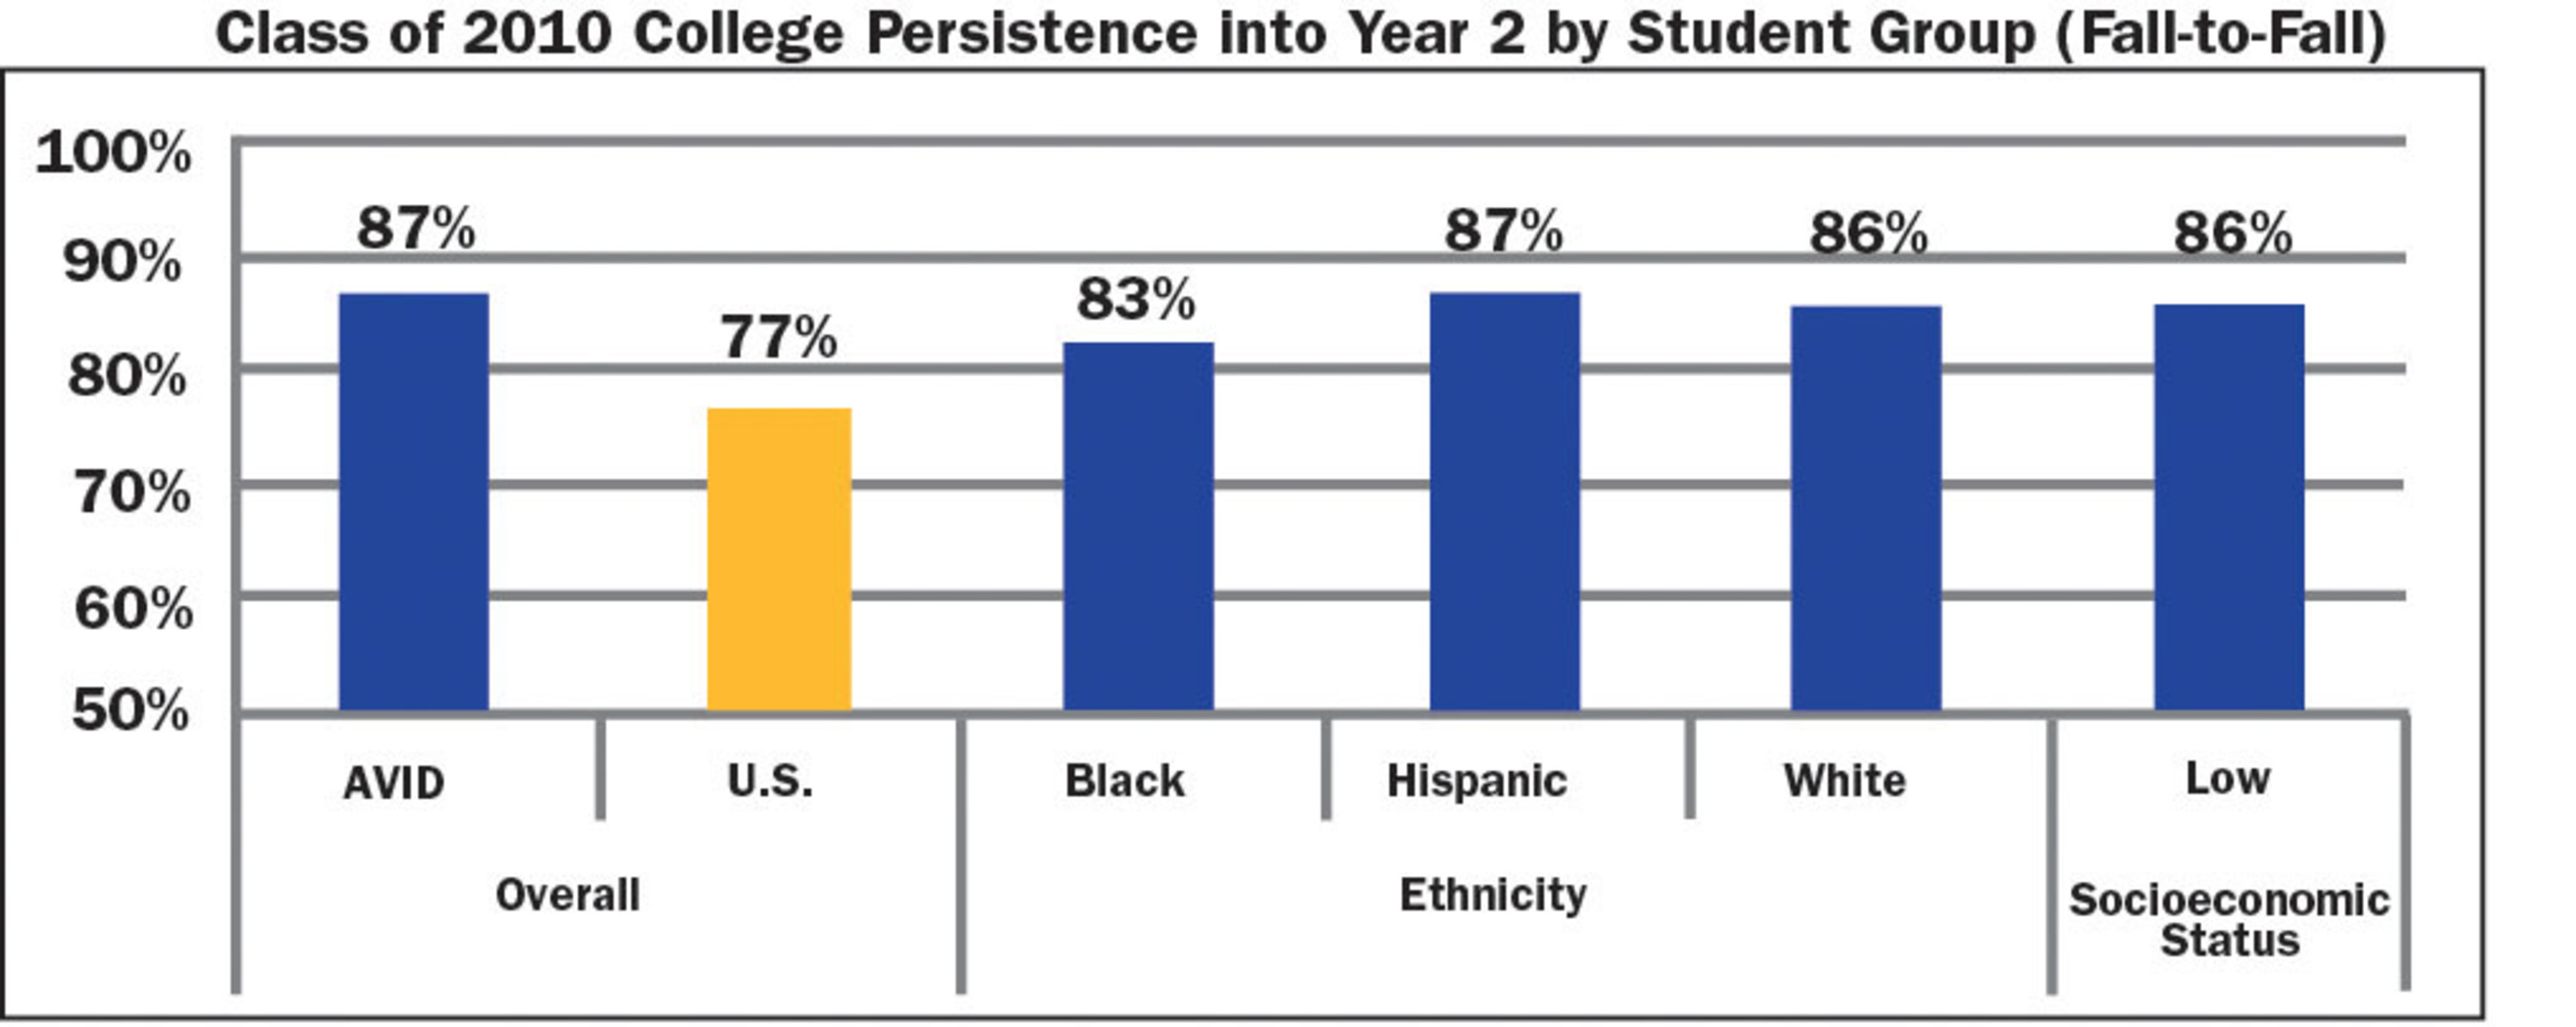 AVID Center Infographic: Class of 2010 College Persistence Into Year 2 by Student Group (Fall-to-Fall).